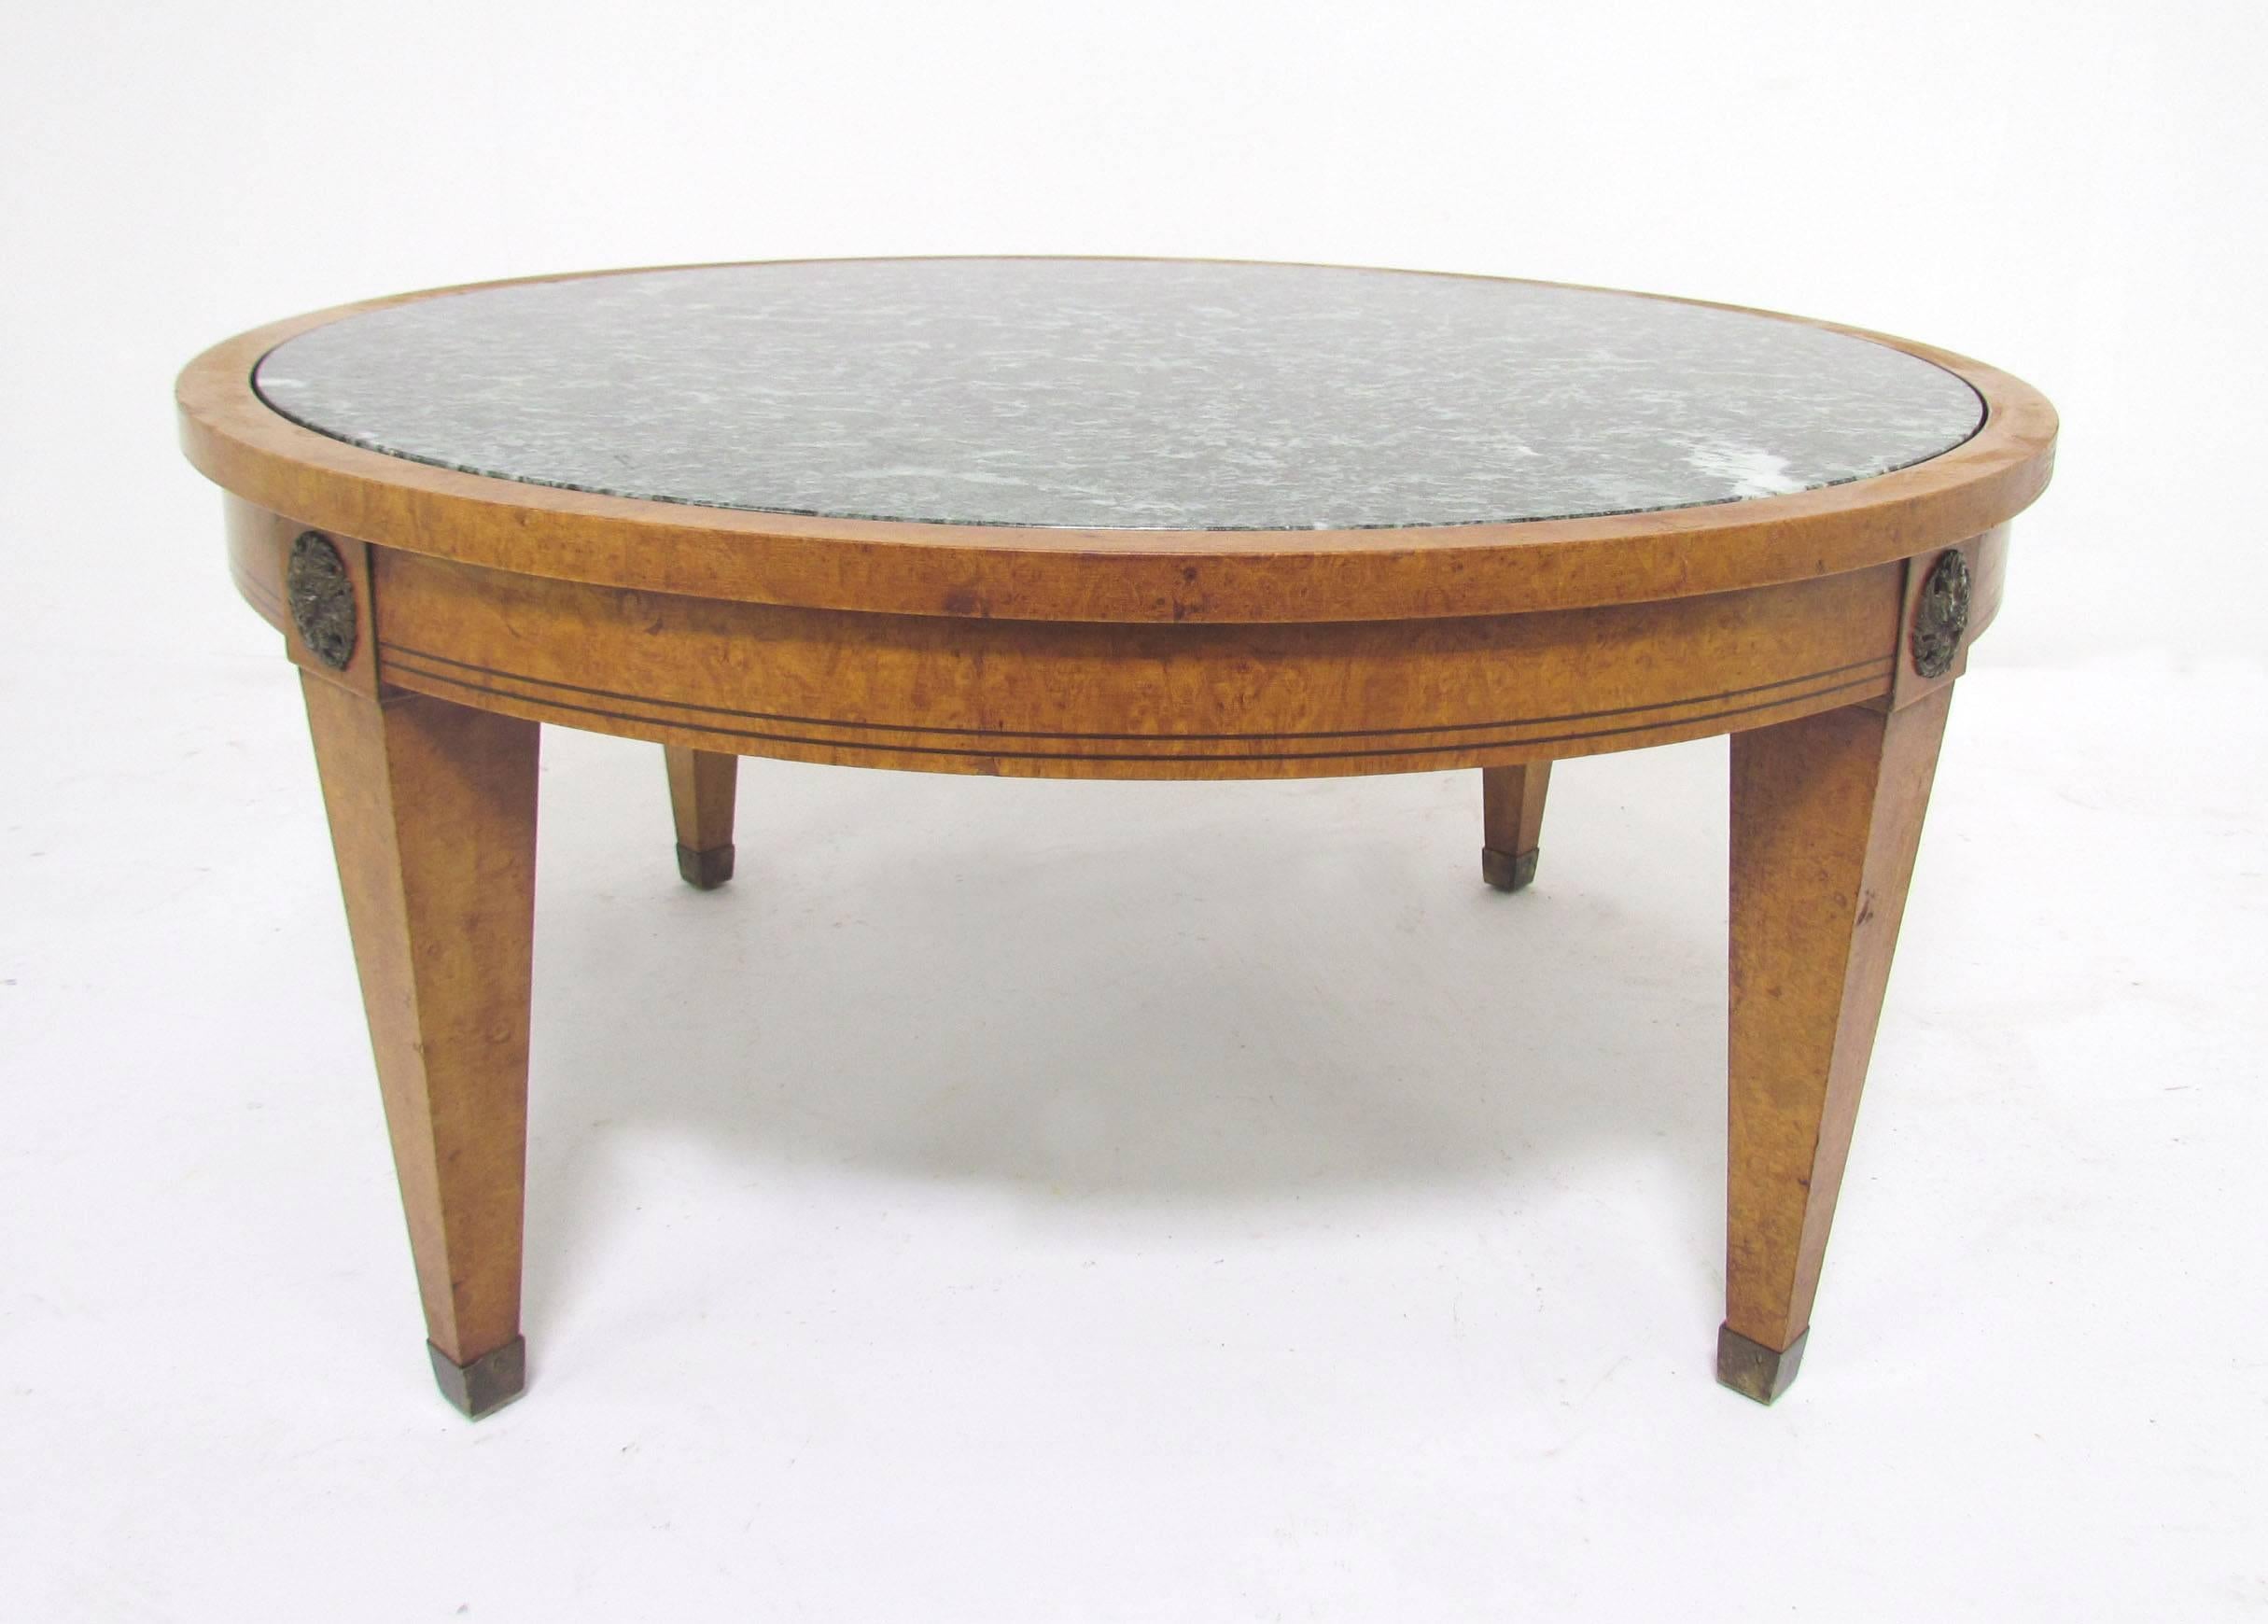 A versatile Mid-Century coffee table with marble top and brass sabots and medallion accents in the neoclassical revival style by Charak furniture, dated 1952.